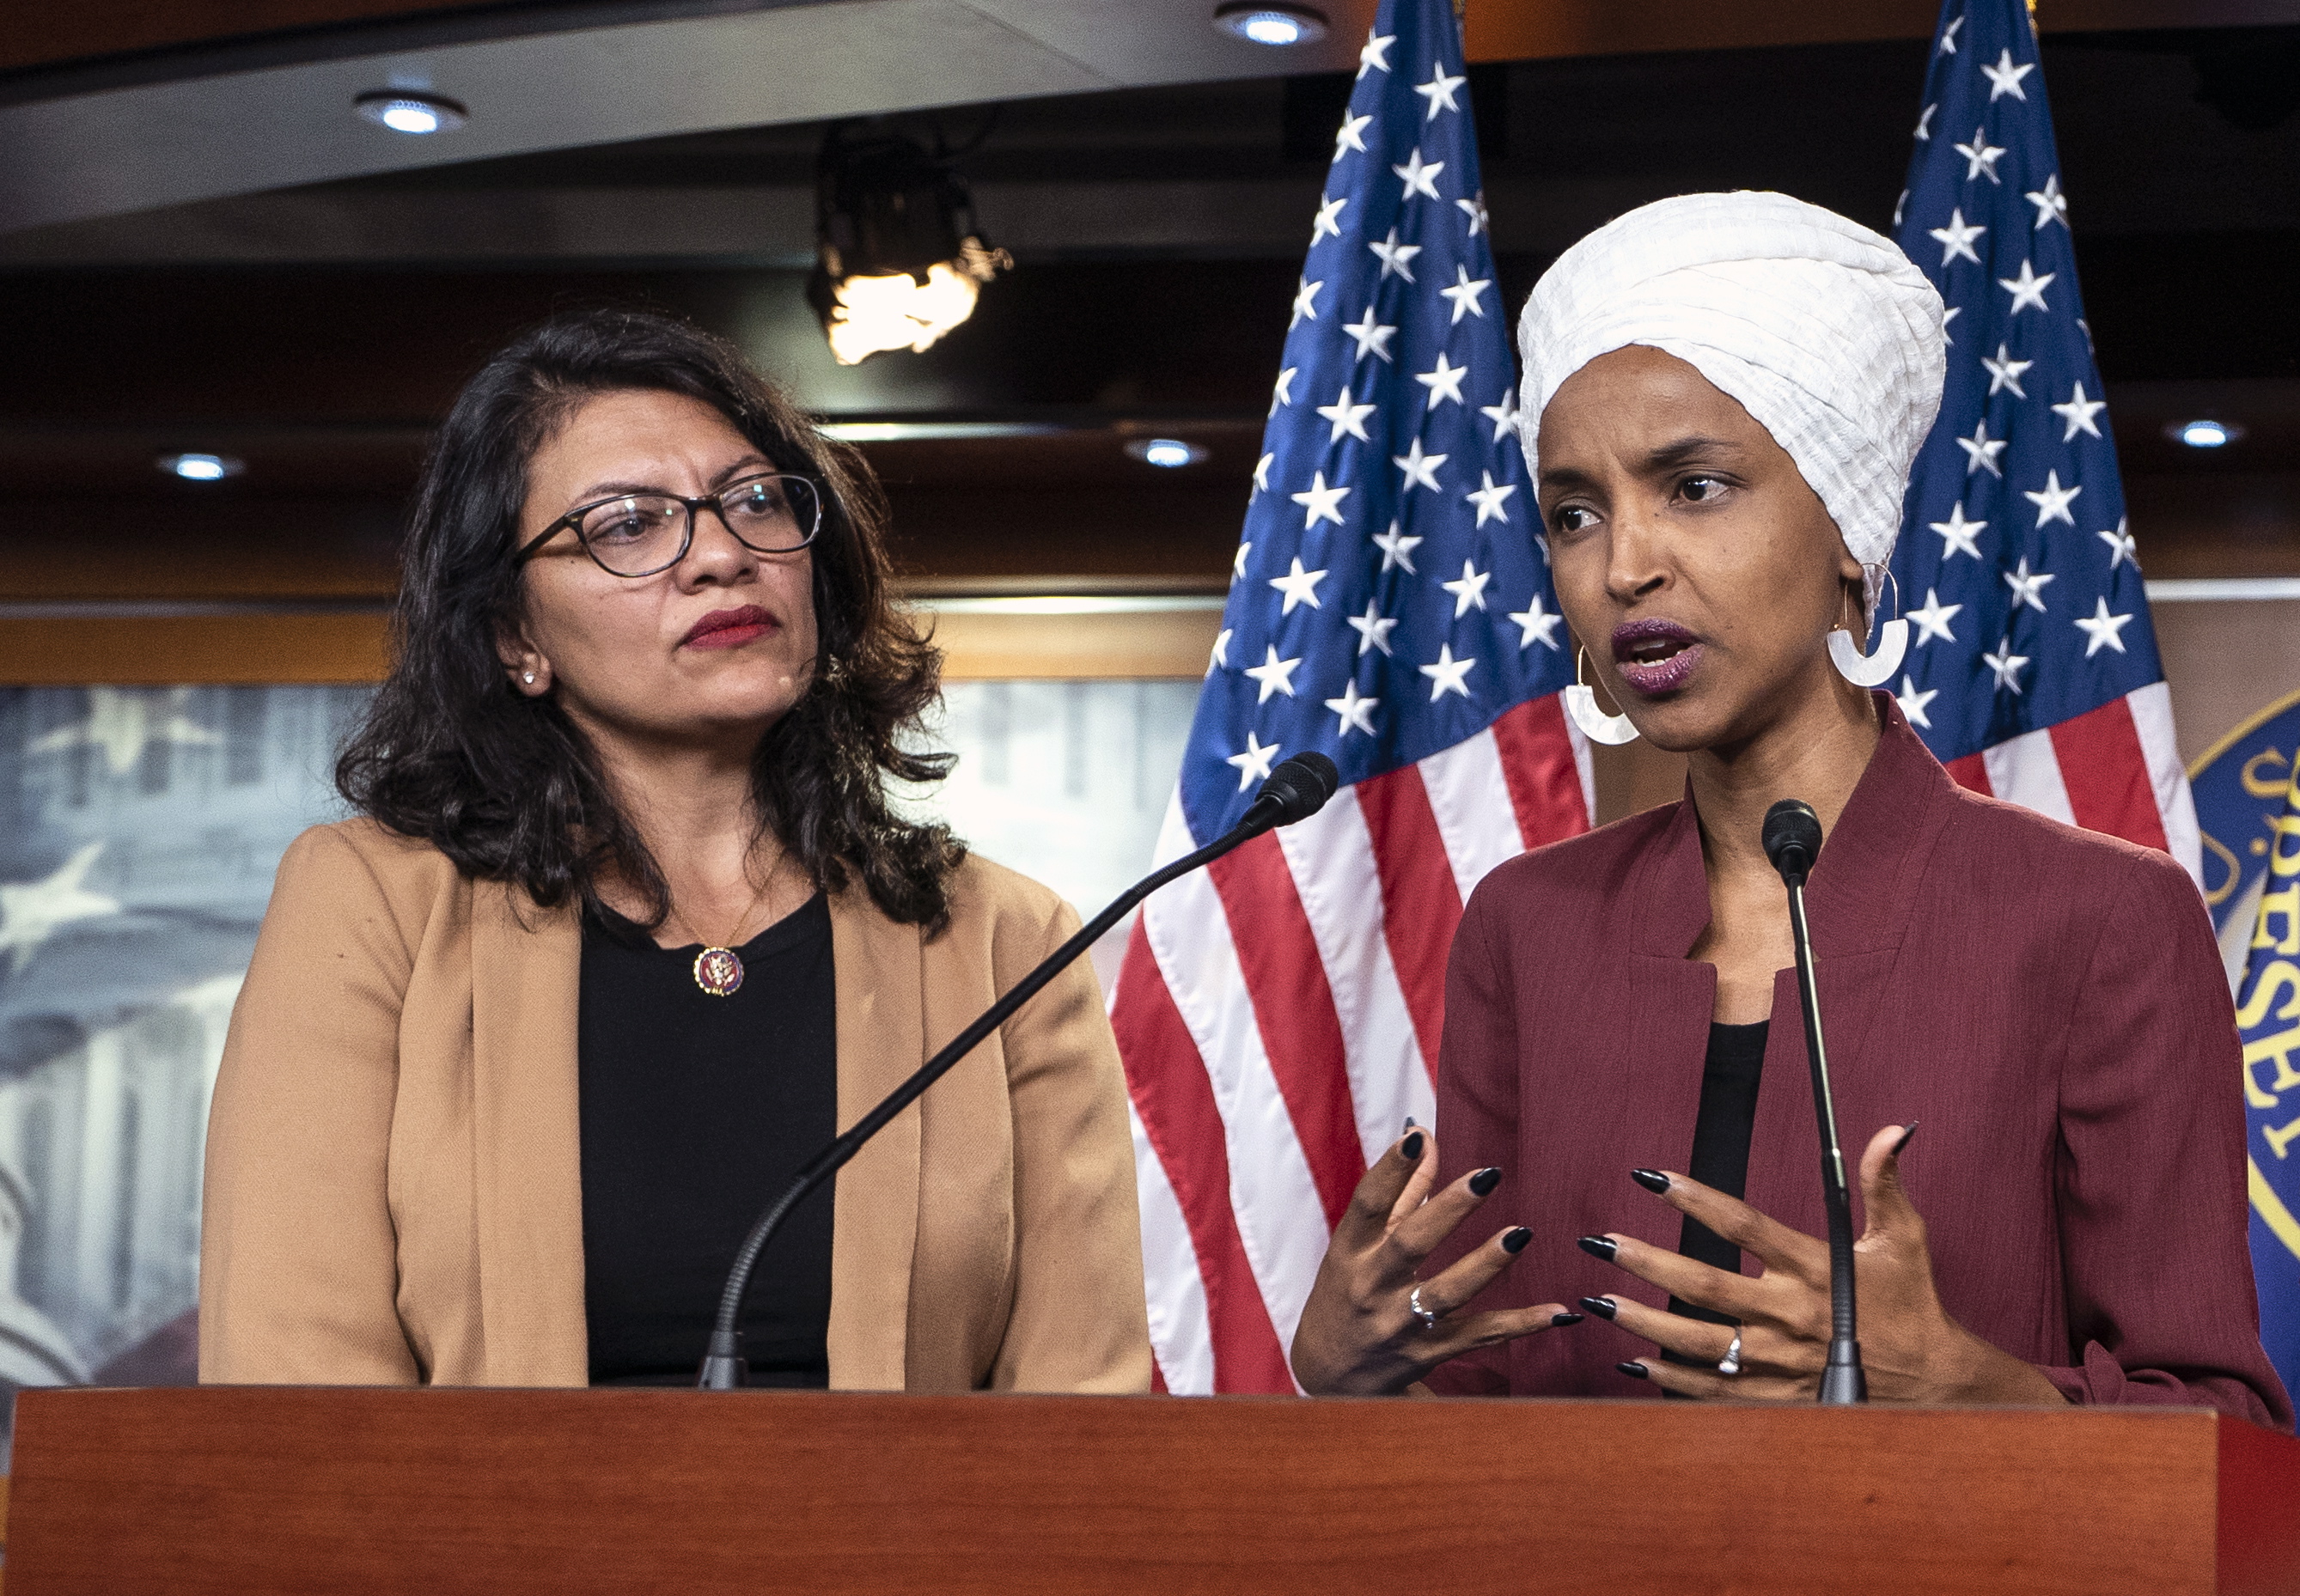 epa07774972 (FILE) - Democratic Representatives Ilhan Omar (R) and Rashida Tlaib speak about President Trump's Twitter attacks against them in the US Capitol in Washington, DC, USA, 15 July 2019 (reissued 15 August 2019). According to media reports, US Democratic congresswomen Rashida Tlaib and Ilhan Omar have been banned from entering Israel over an anti-Israel boycott movement.  EPA/JIM LO SCALZO